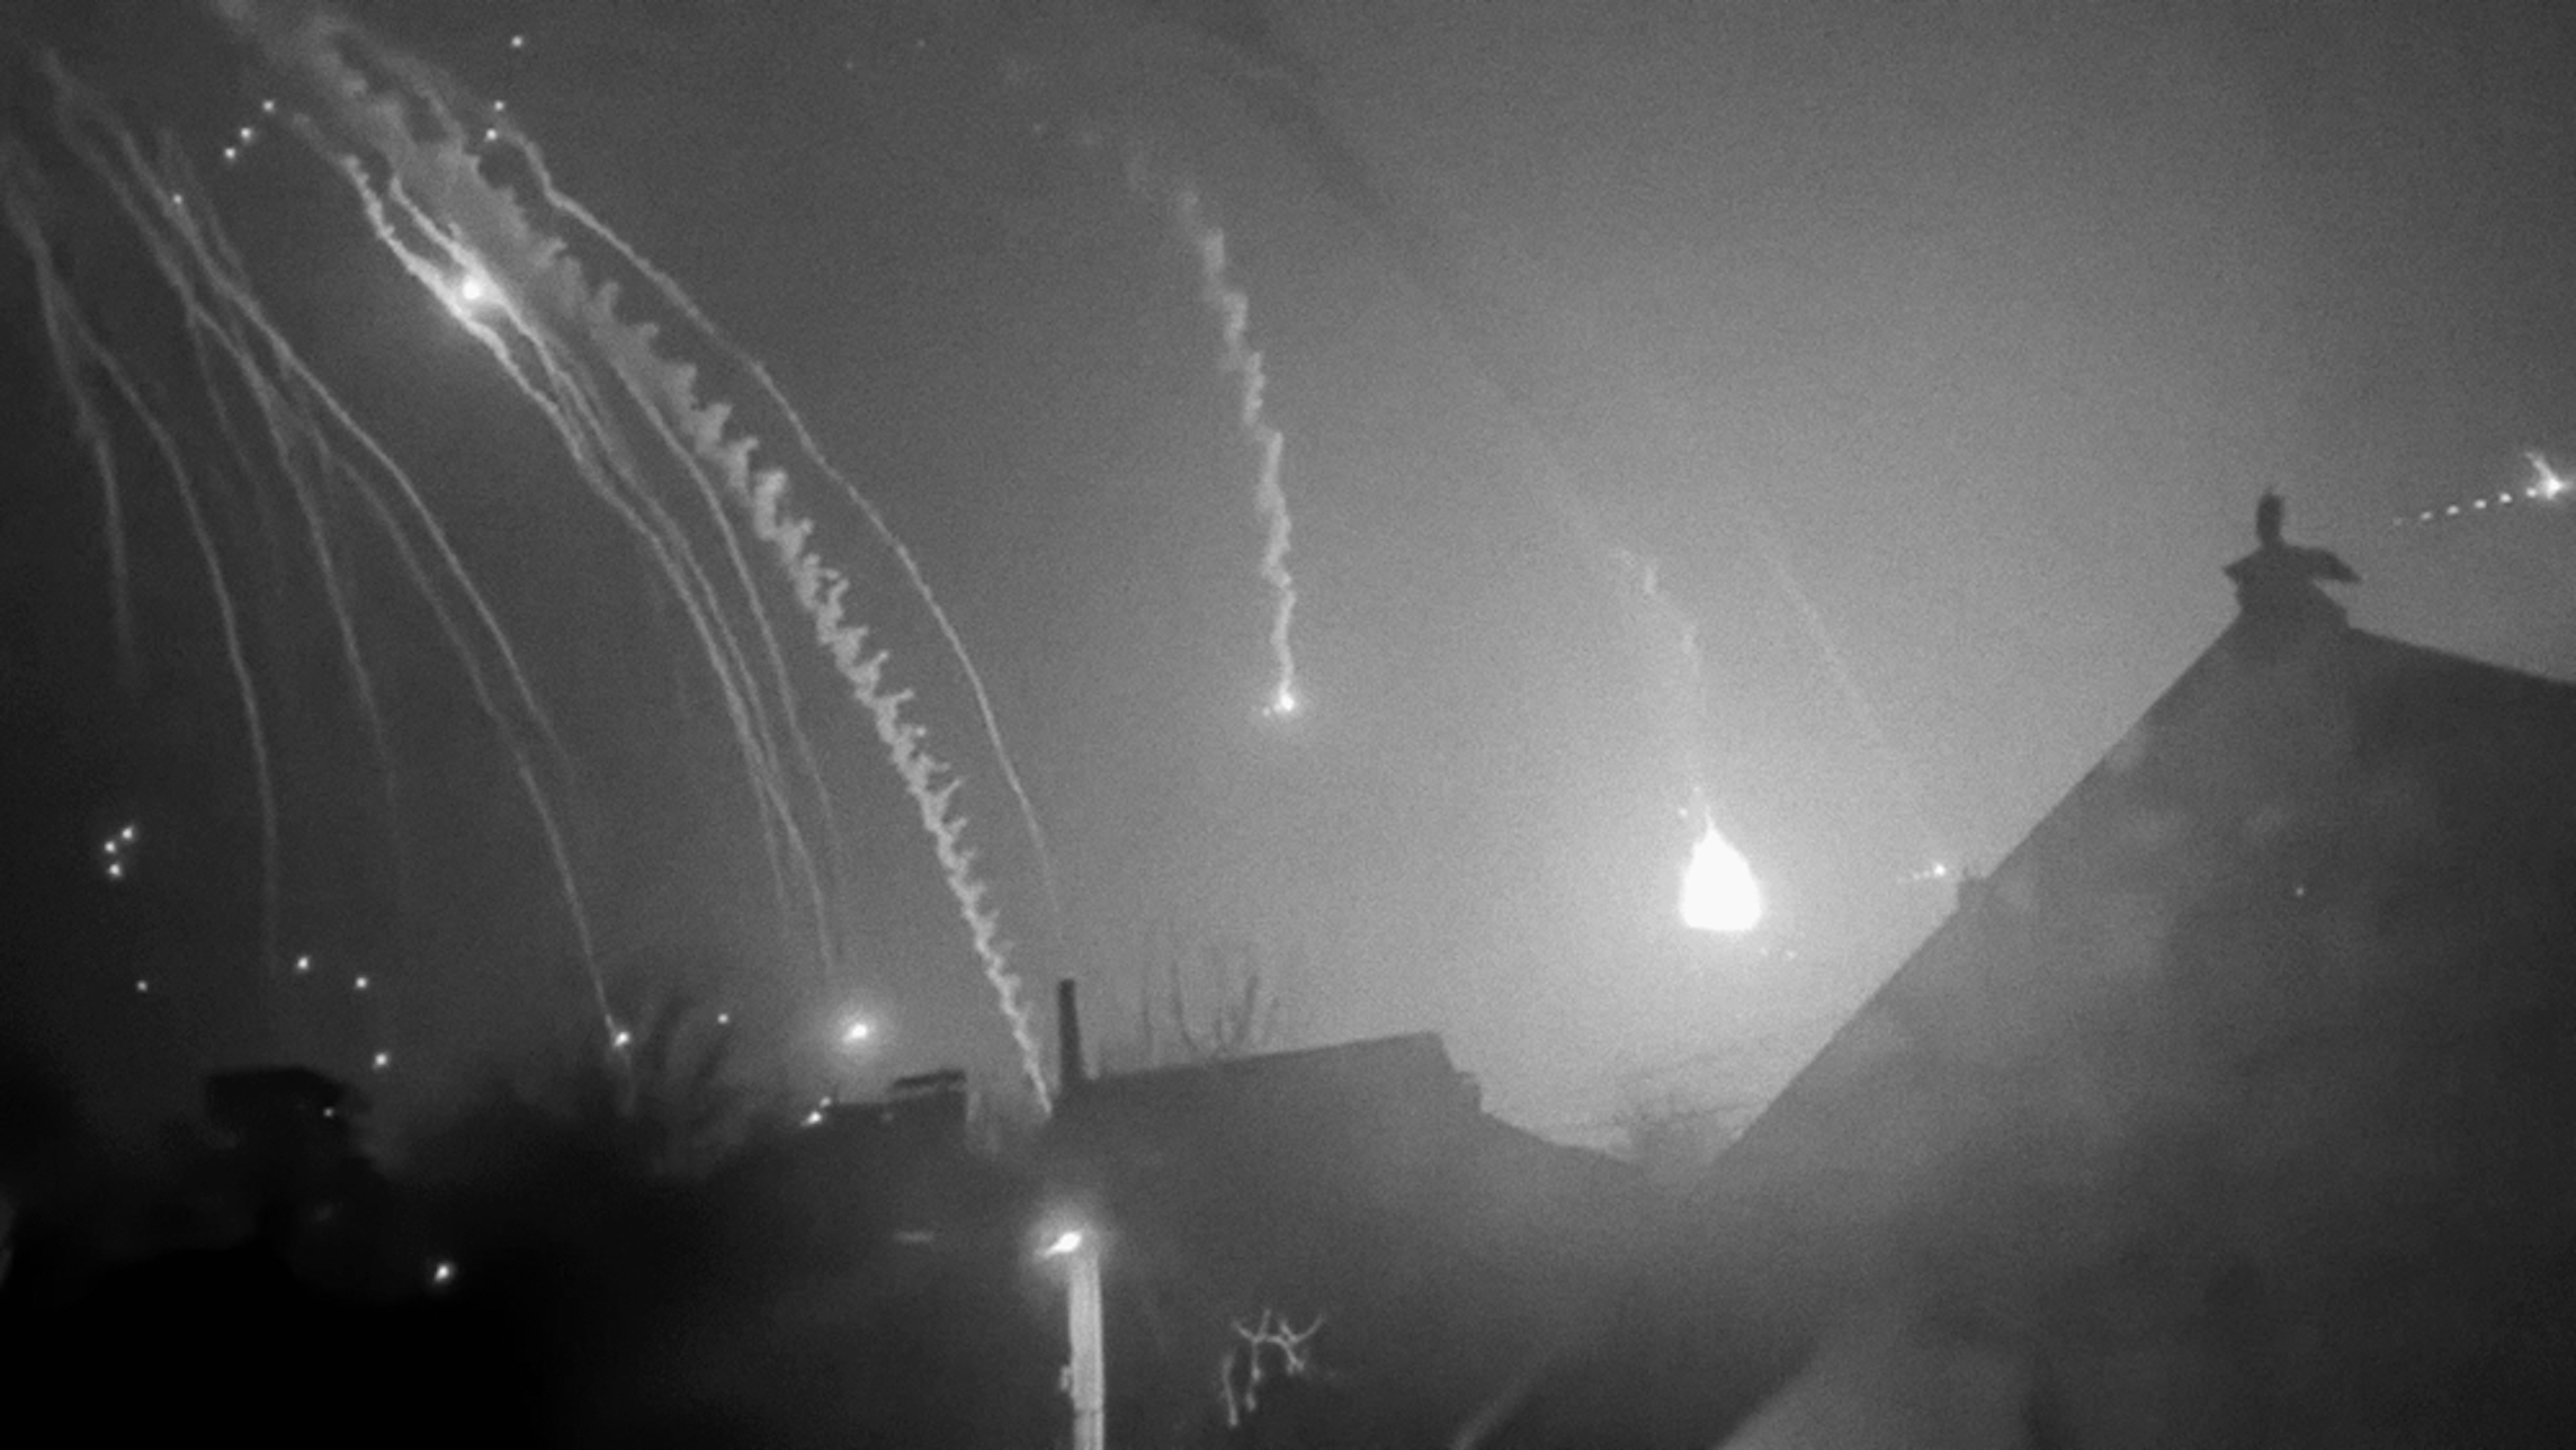 Black and white scene showcasing trails of smoke illuminated by sparks of light. Roofs of homes and chimneys can be seen in the glow. 